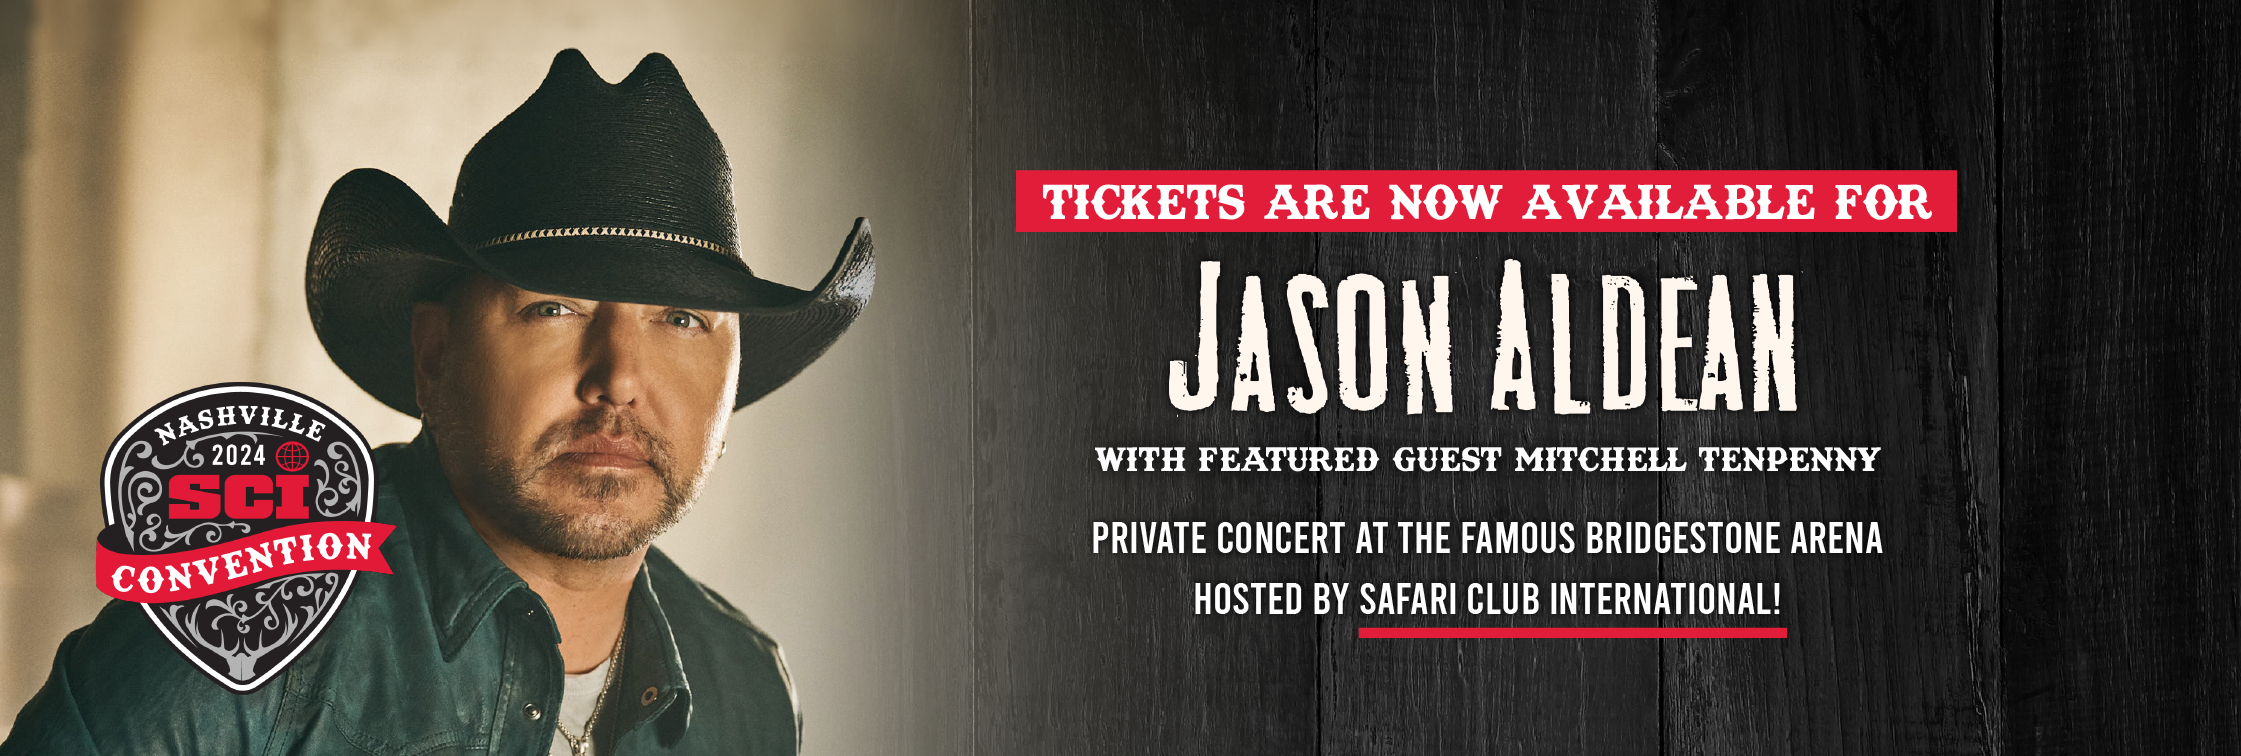 Get your tickets to the private SCI concert featuring Jason Aldean at Bridgestone Arena